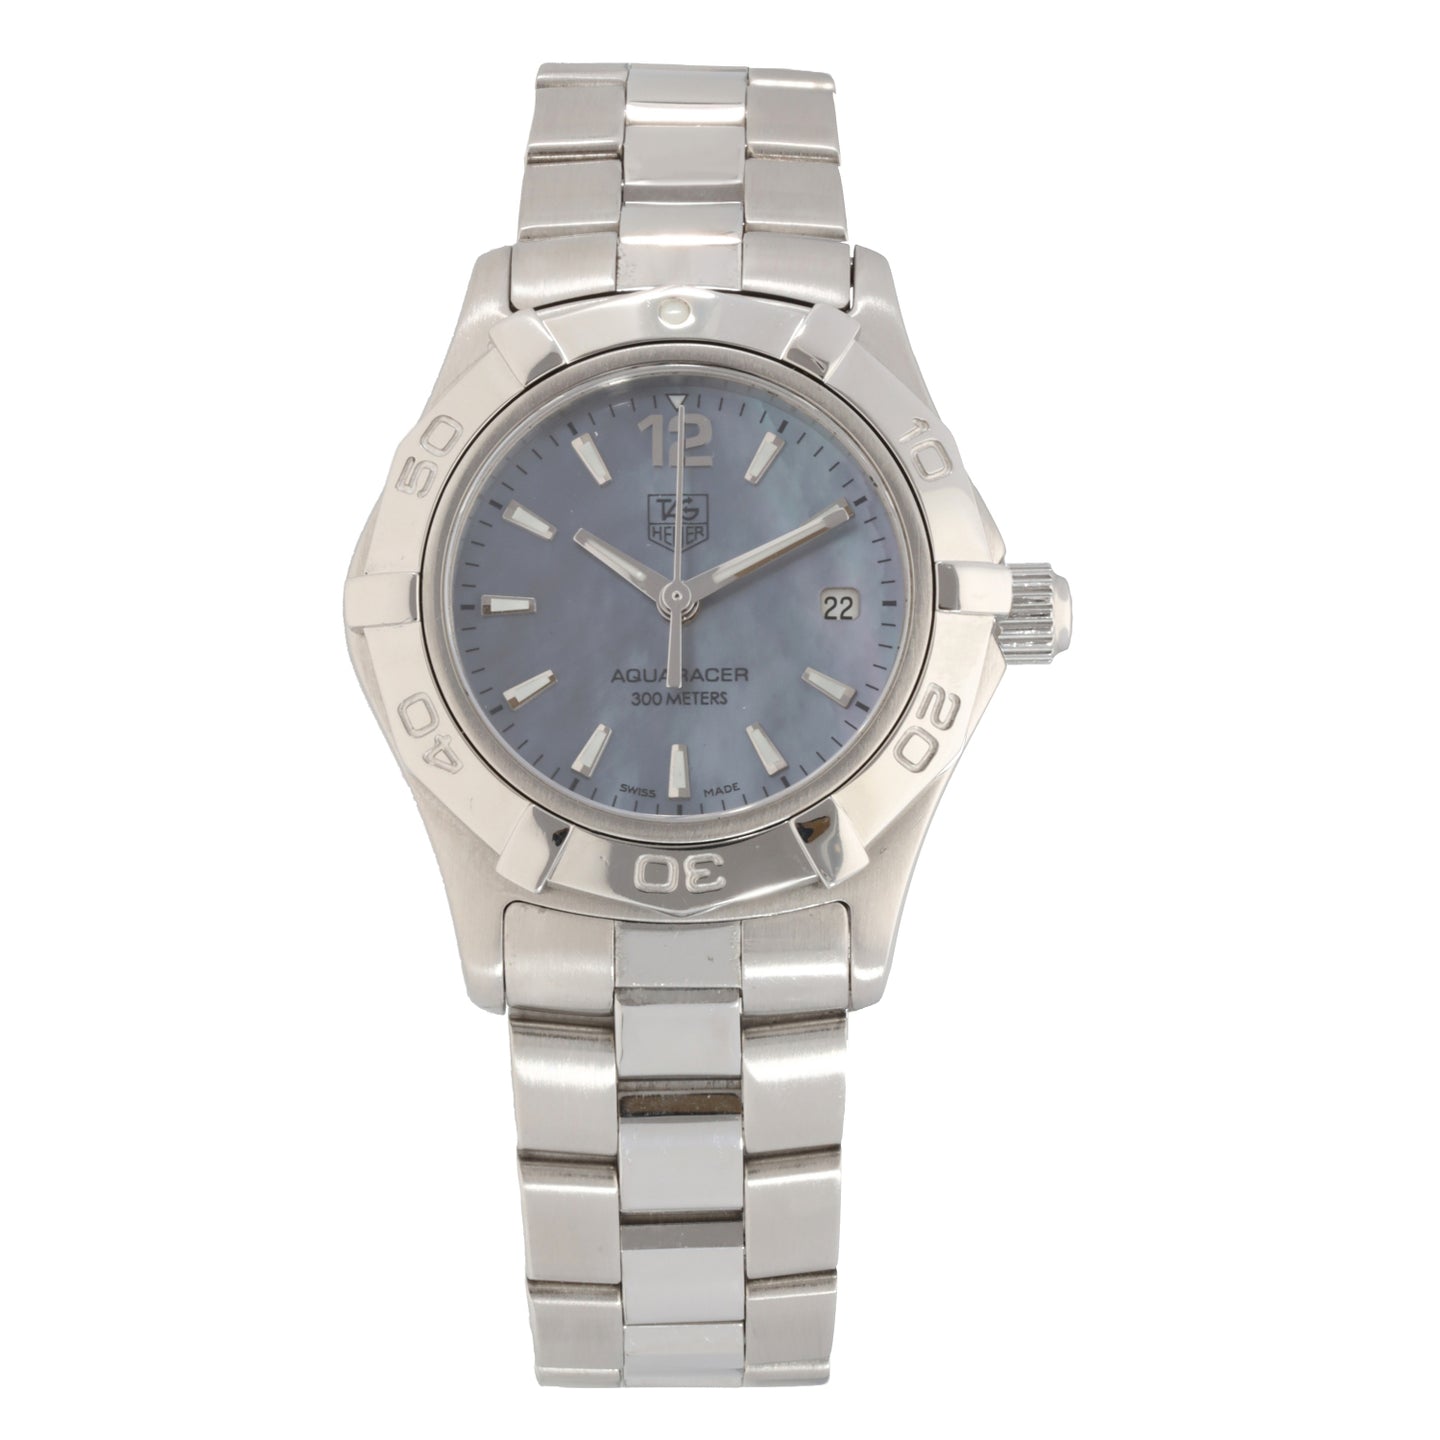 Tag Heuer Aquaracer WAF1417 27mm Stainless Steel Watch